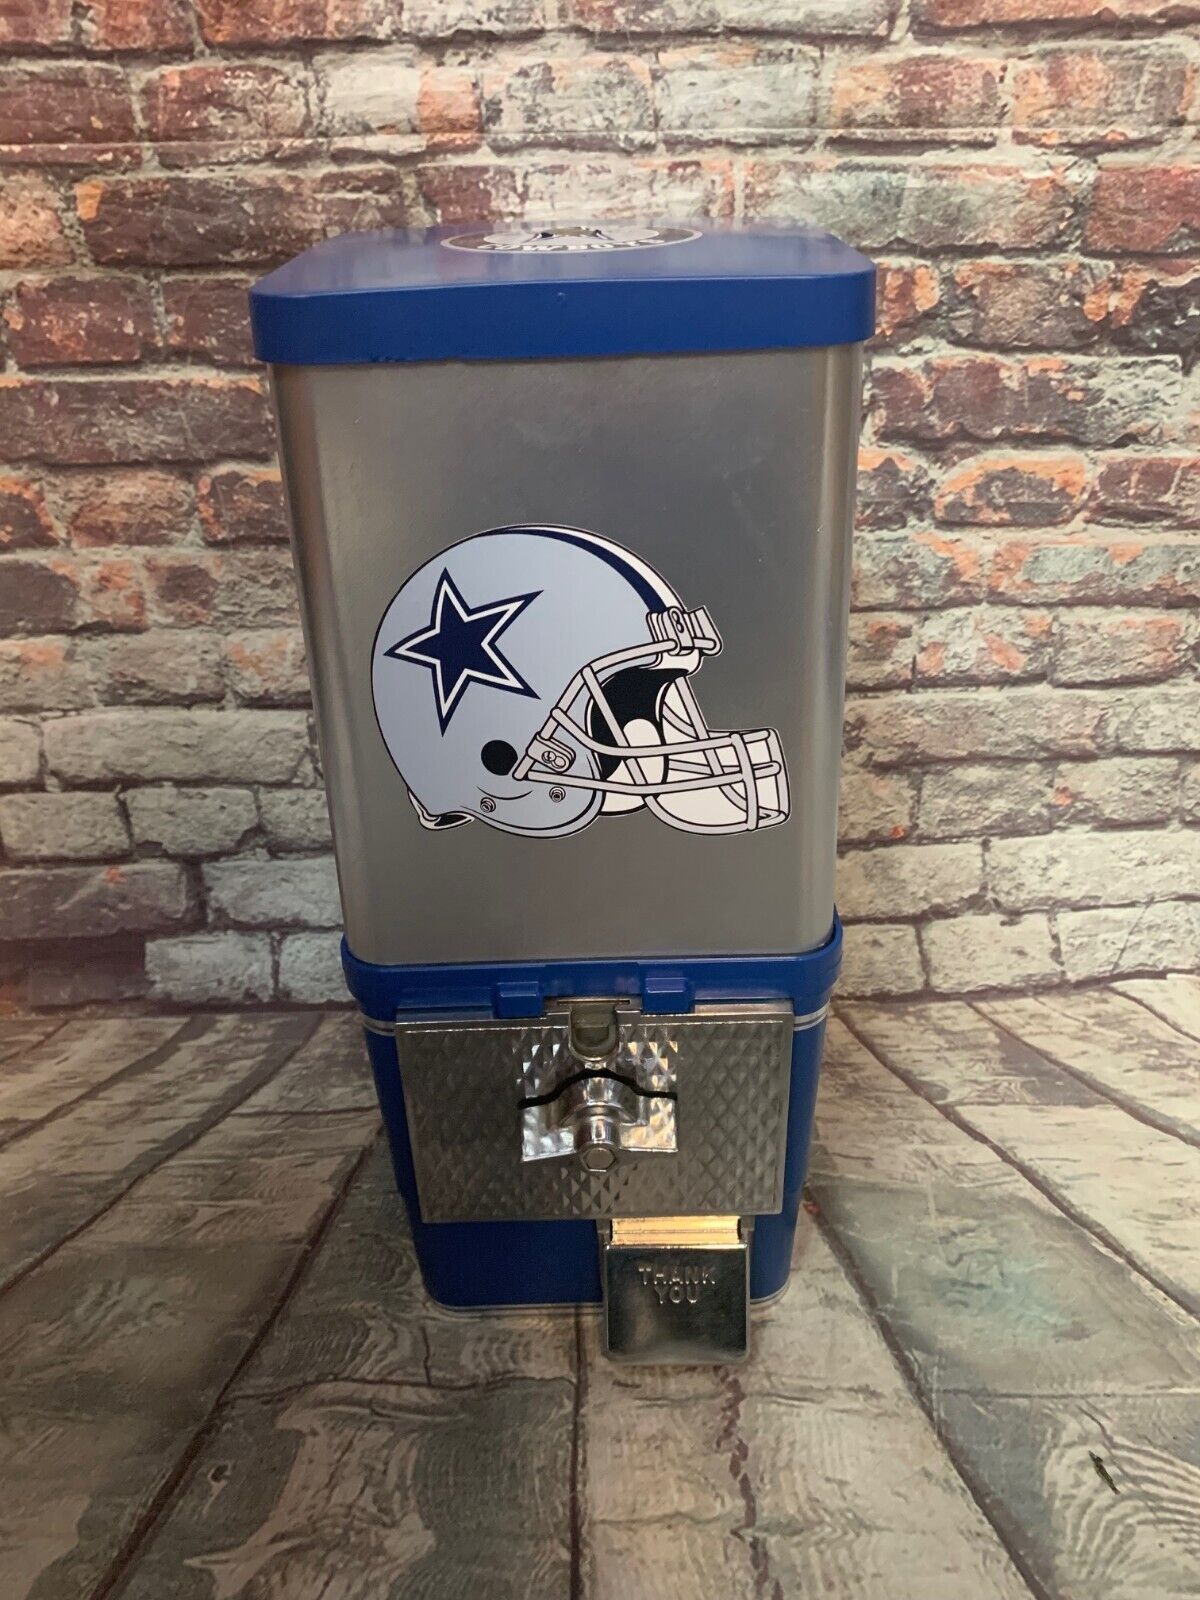 vintage gumball candy machine Dallas cowboys inspired novelty gift man cave